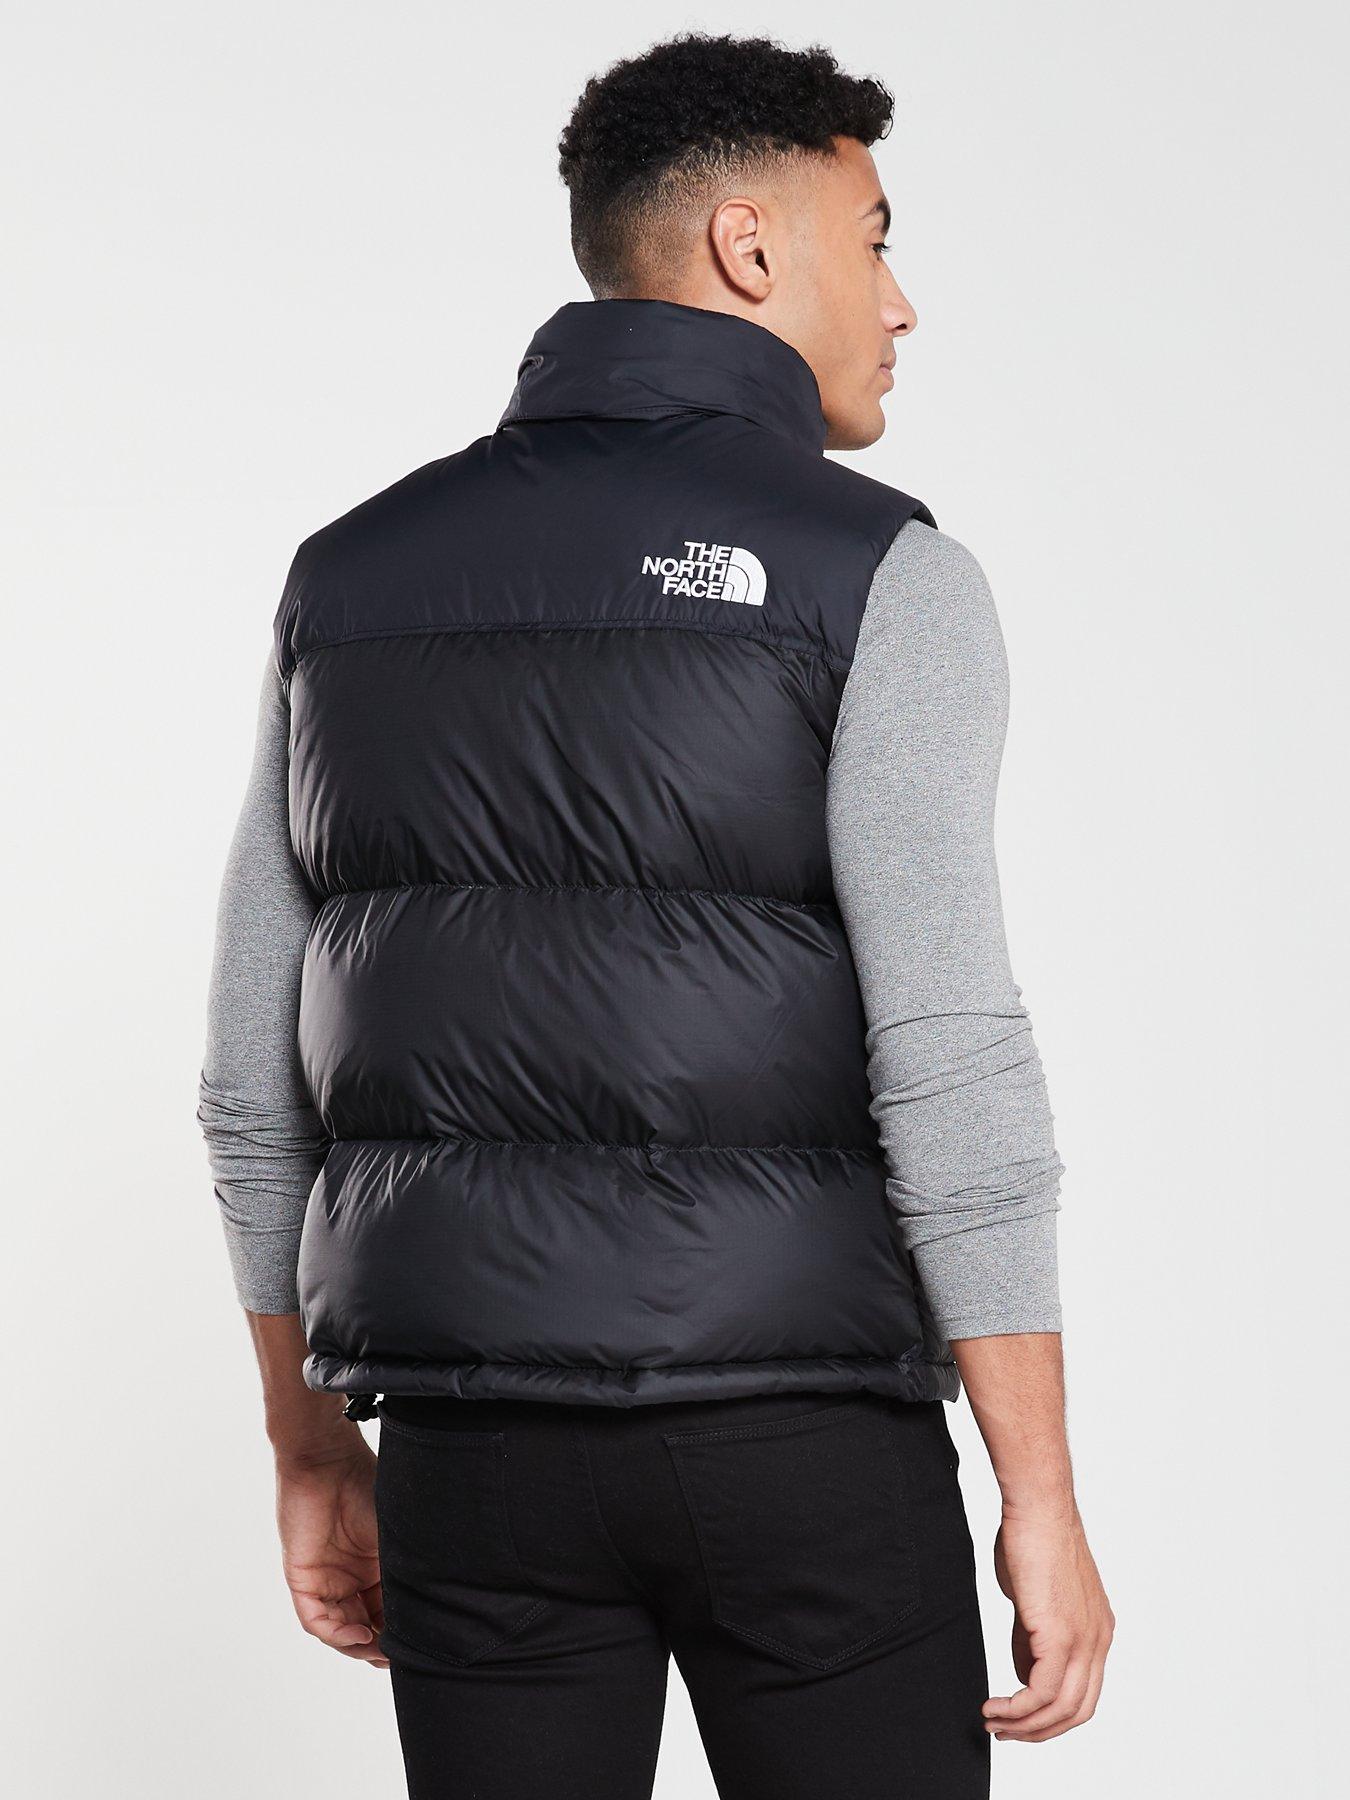 north face puffer gilet - dsvdedommel 